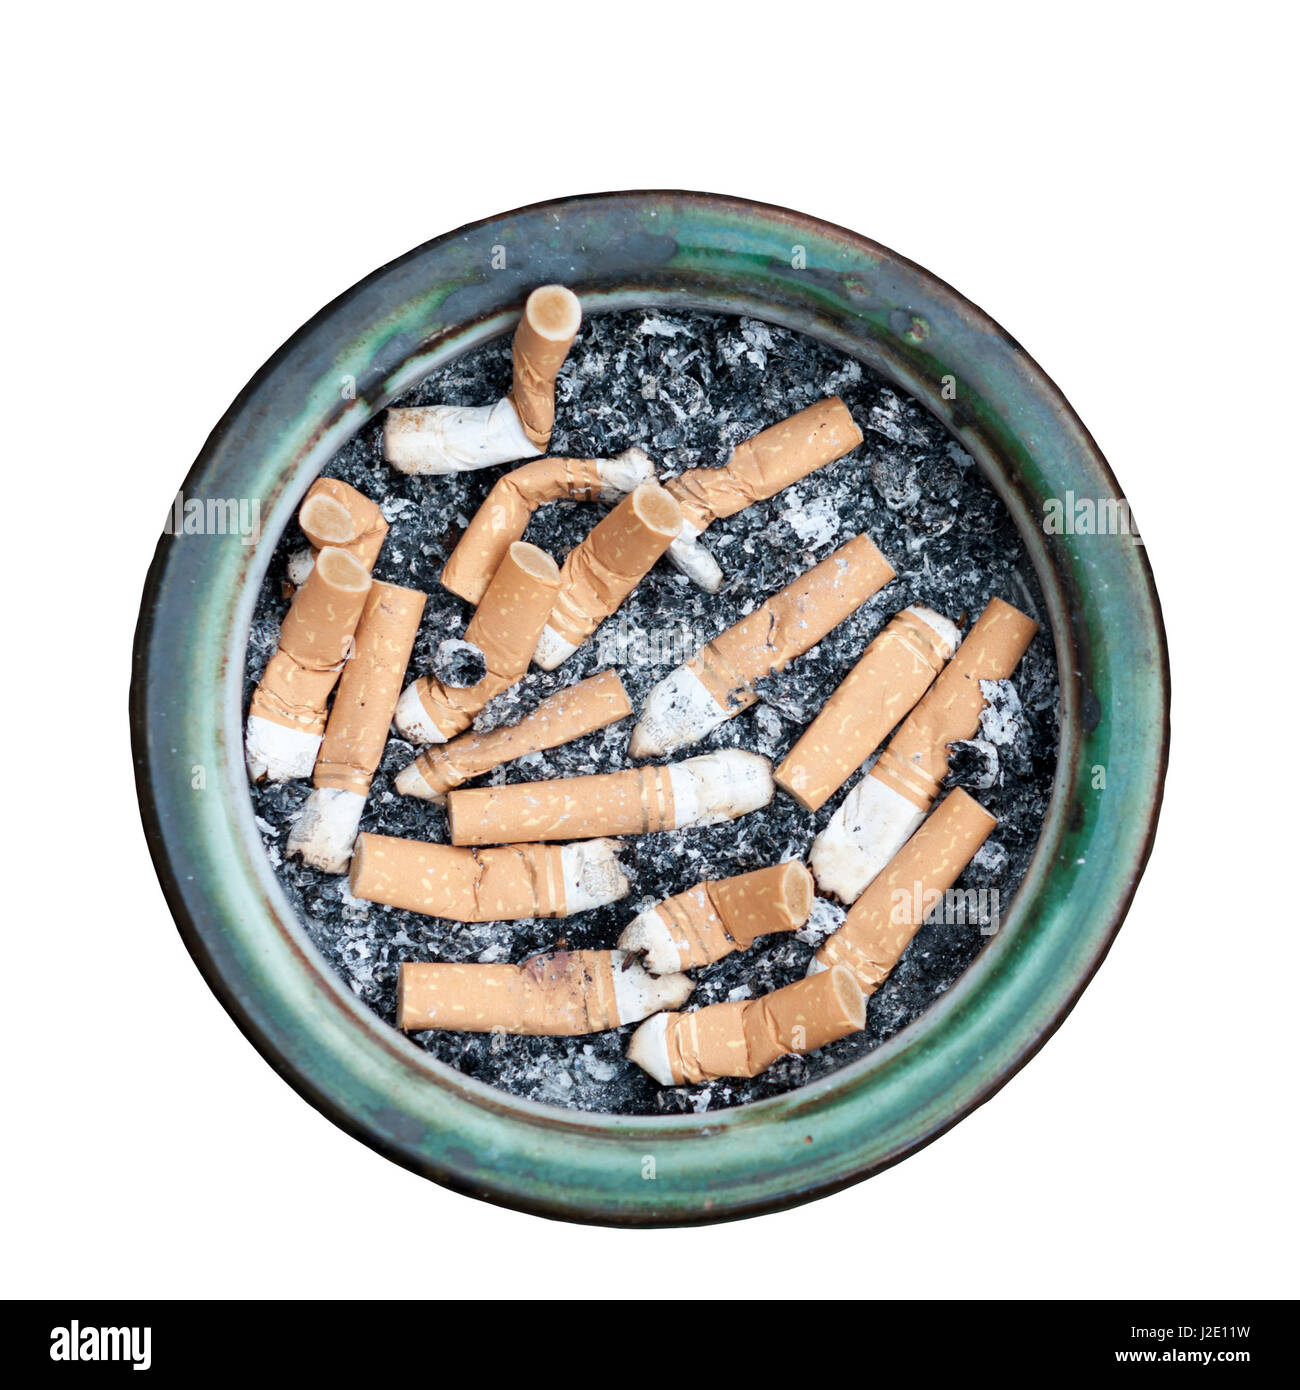 A circular ashtray full of old cigarette stubs. Stock Photo